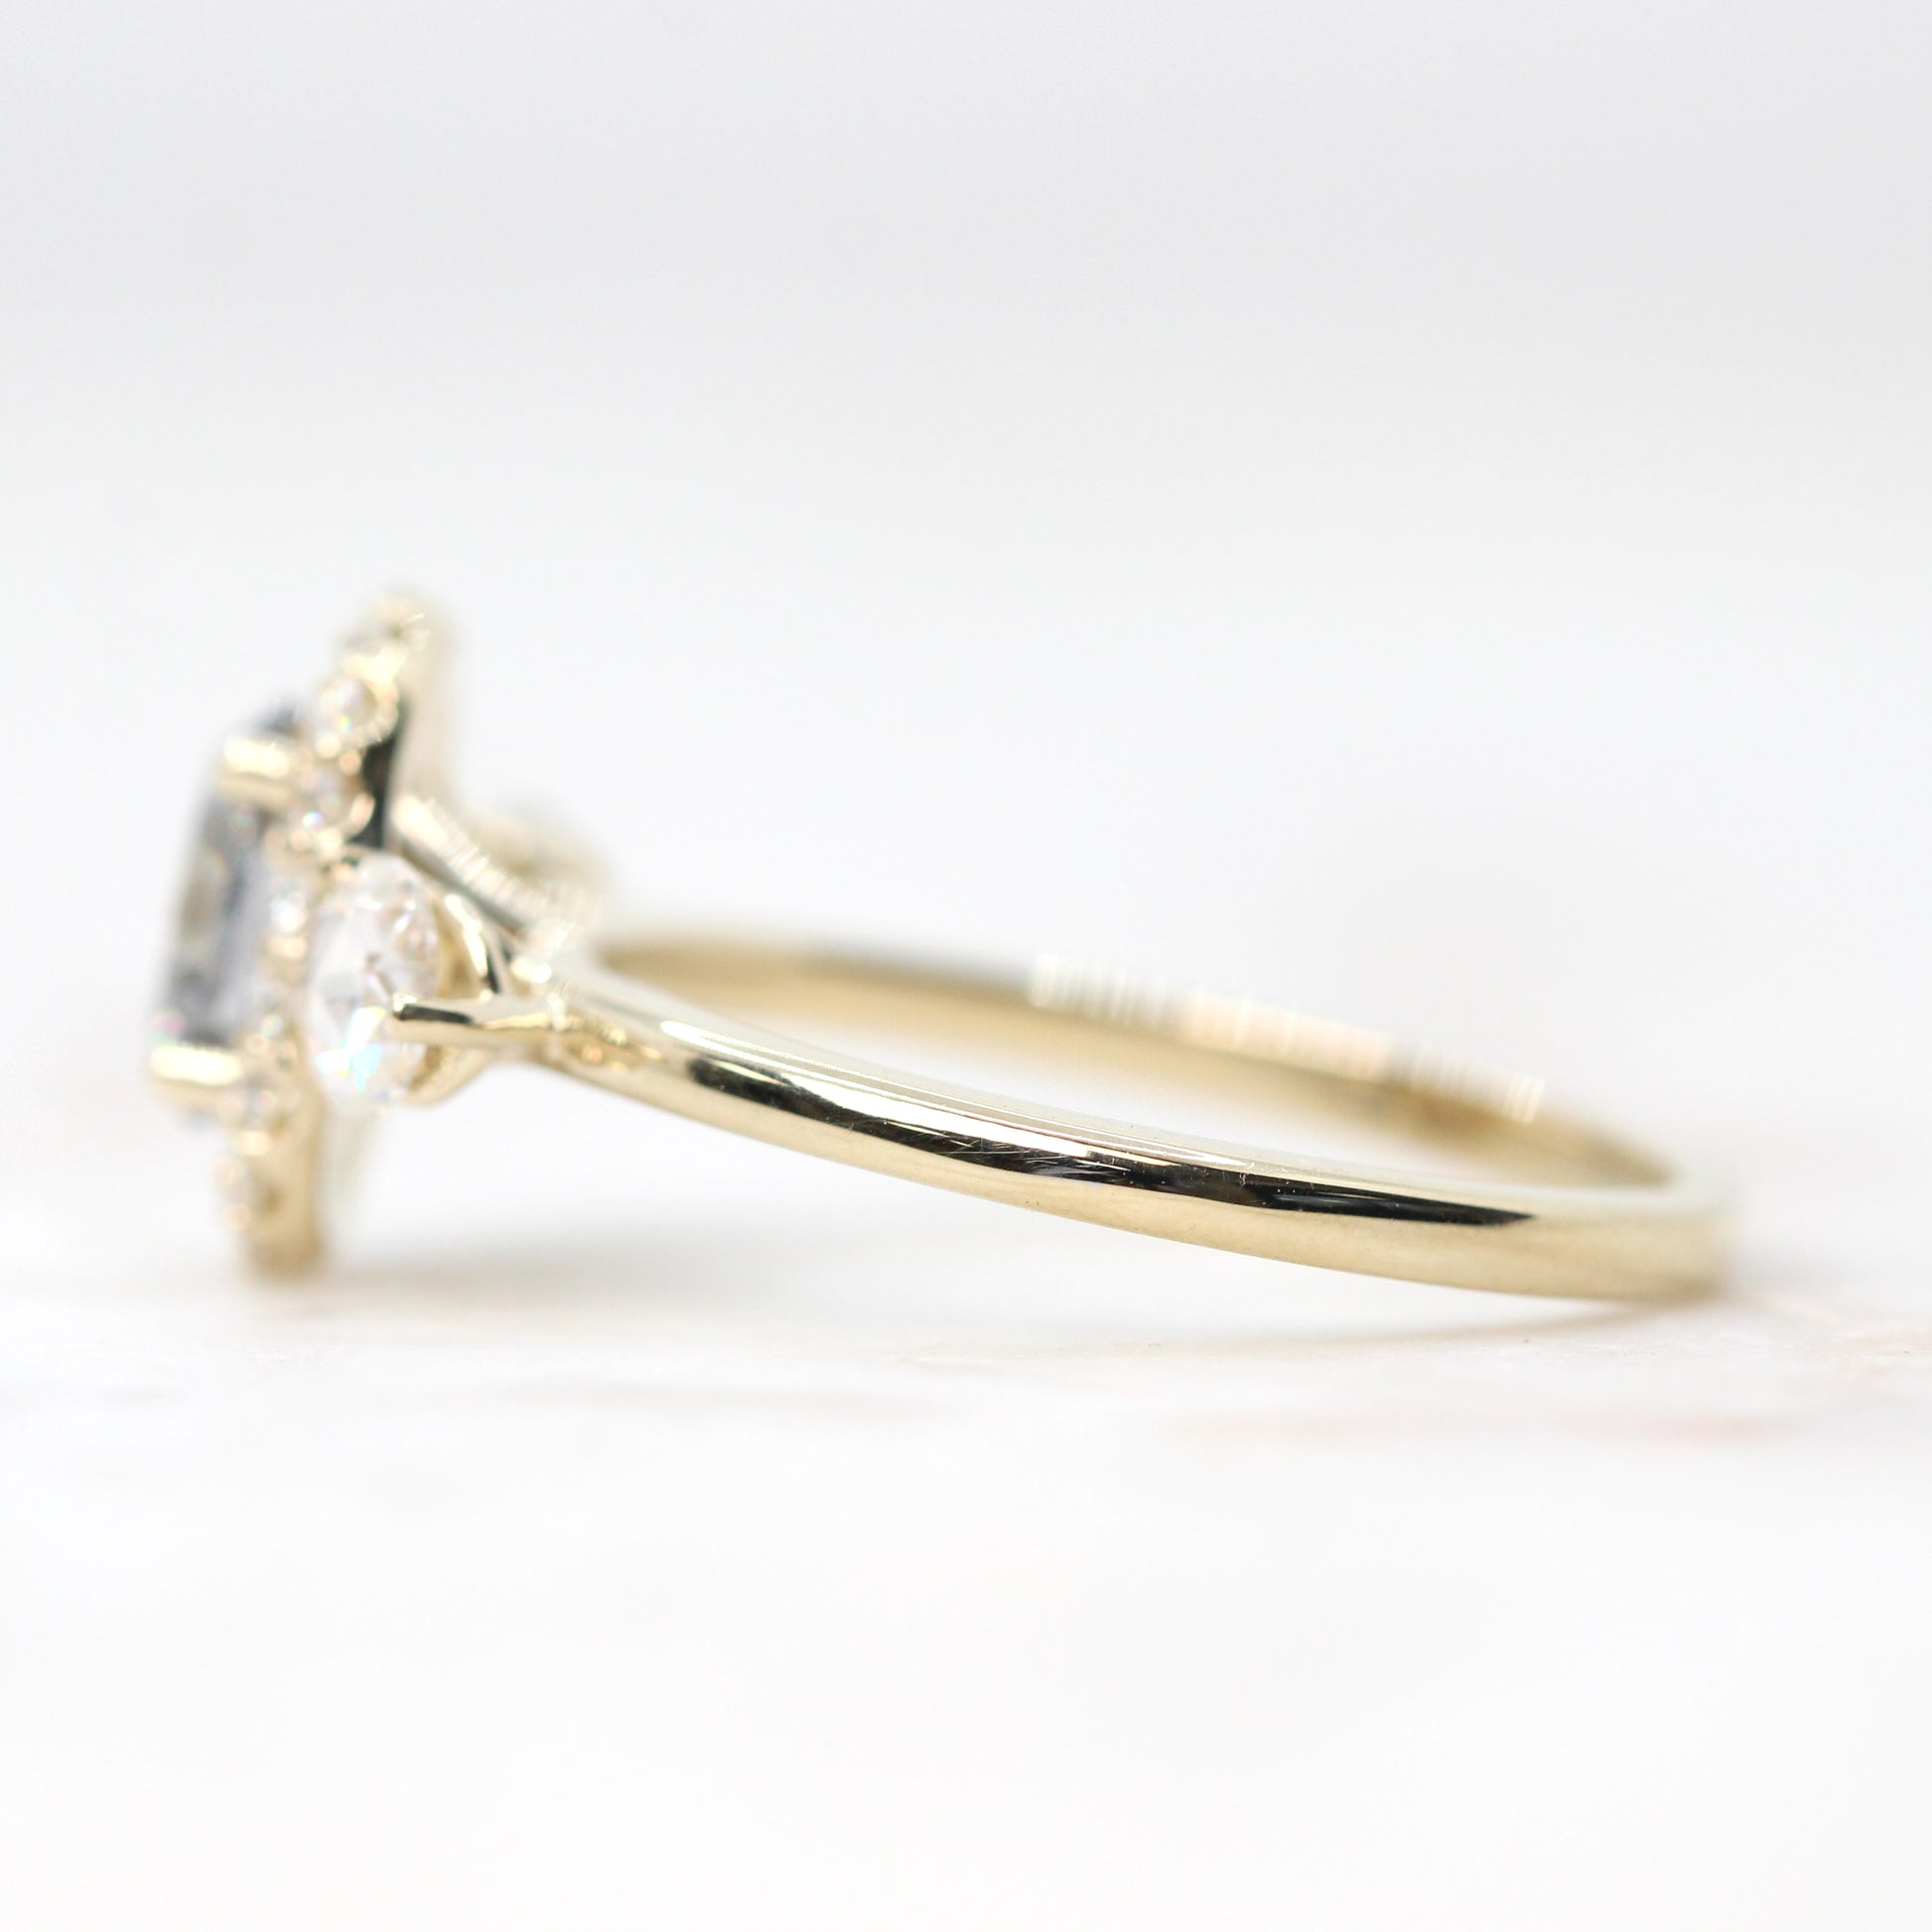 Annalyse Ring with an Oval Gray Moissanite and Moissanite Accents - Made to Order, Choose Your Gold Tone - Midwinter Co. Alternative Bridal Rings and Modern Fine Jewelry